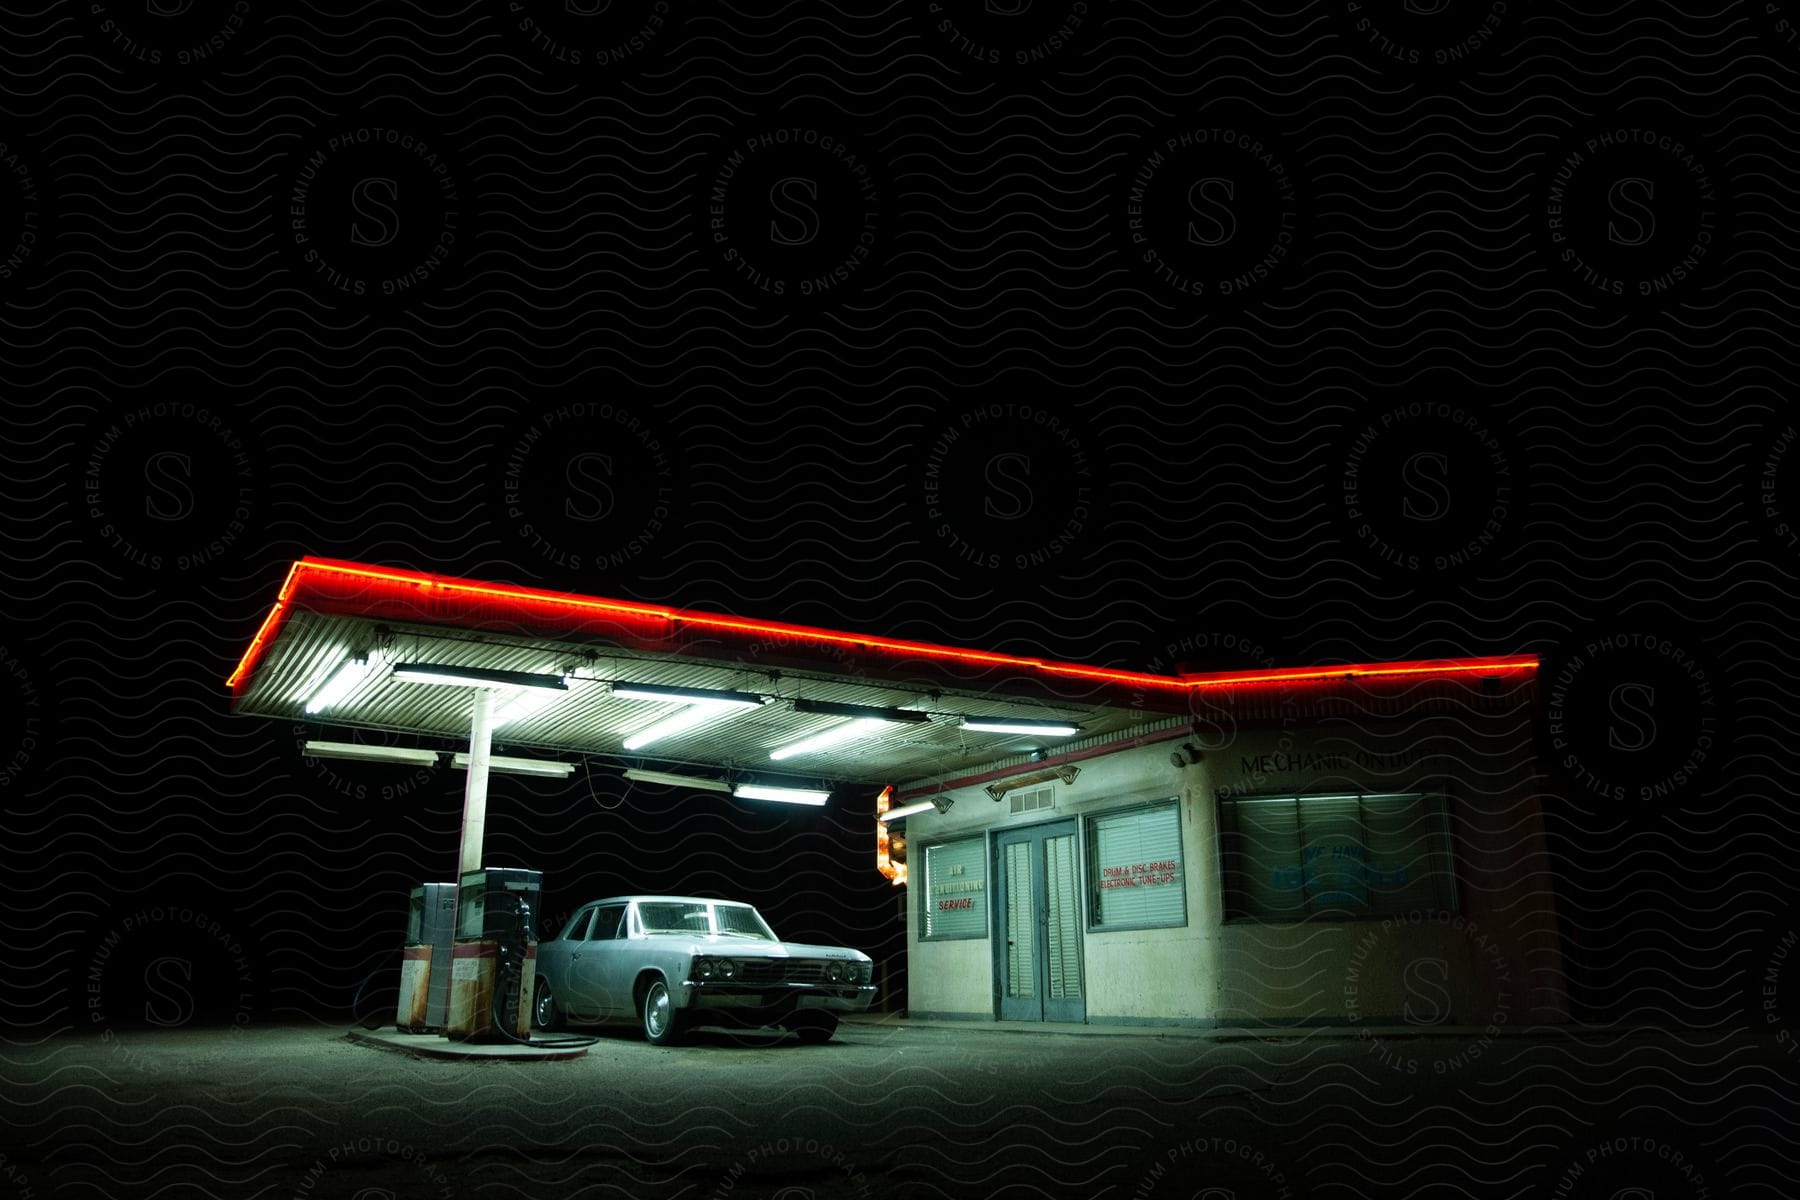 Gas station at night with one blue car parked at the gas pump under the lights